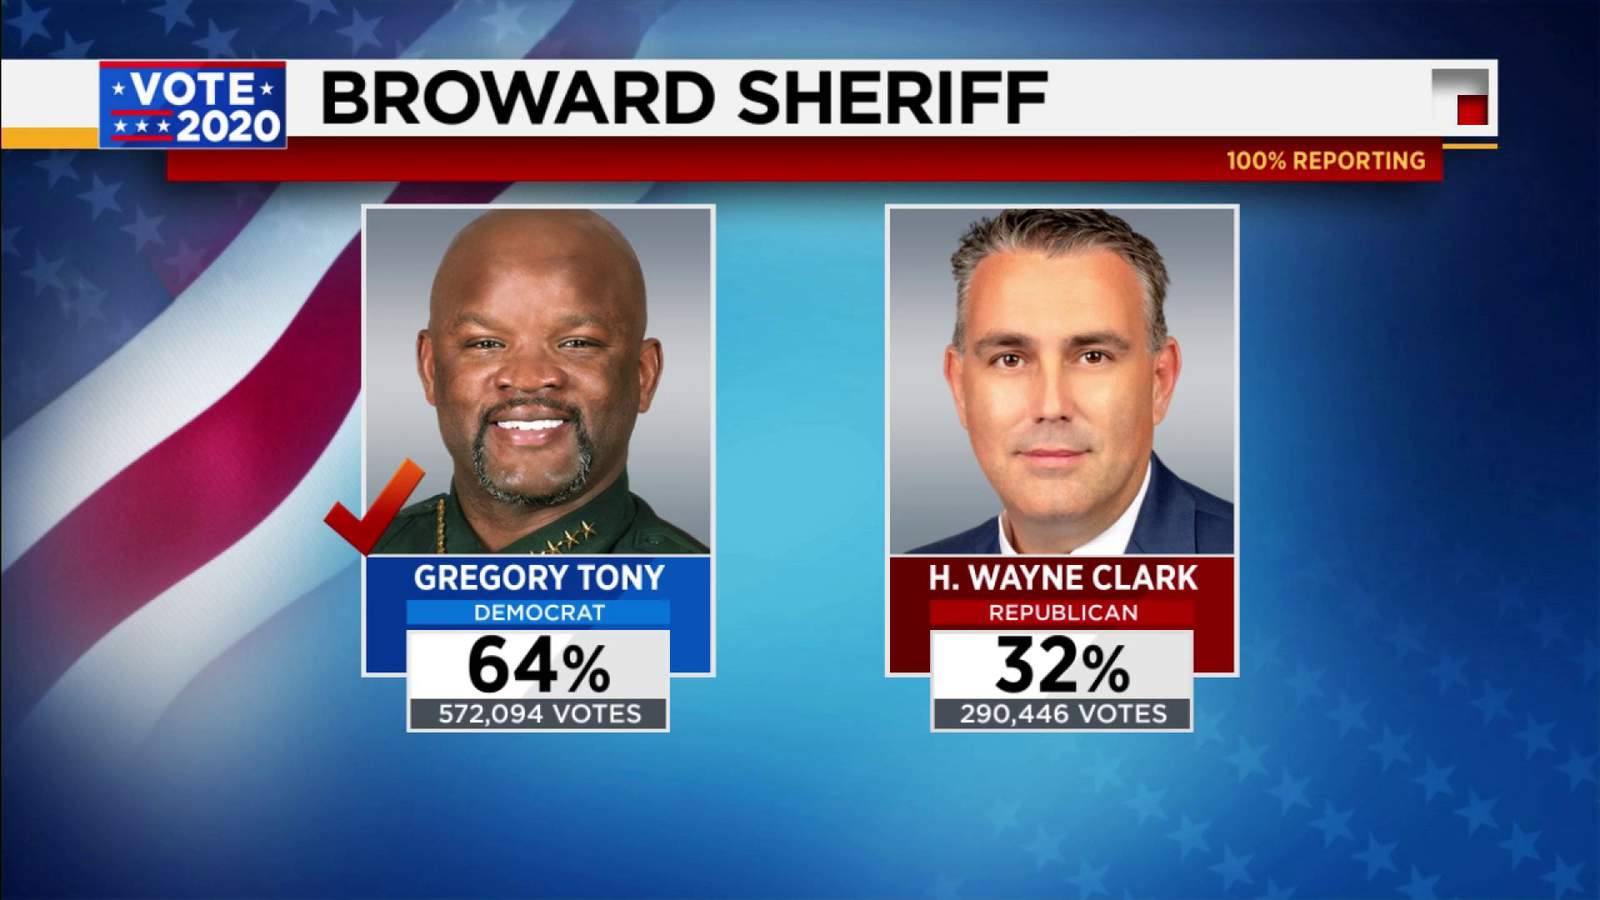 Sheriff Gregory Tony remains Broward’s top cop